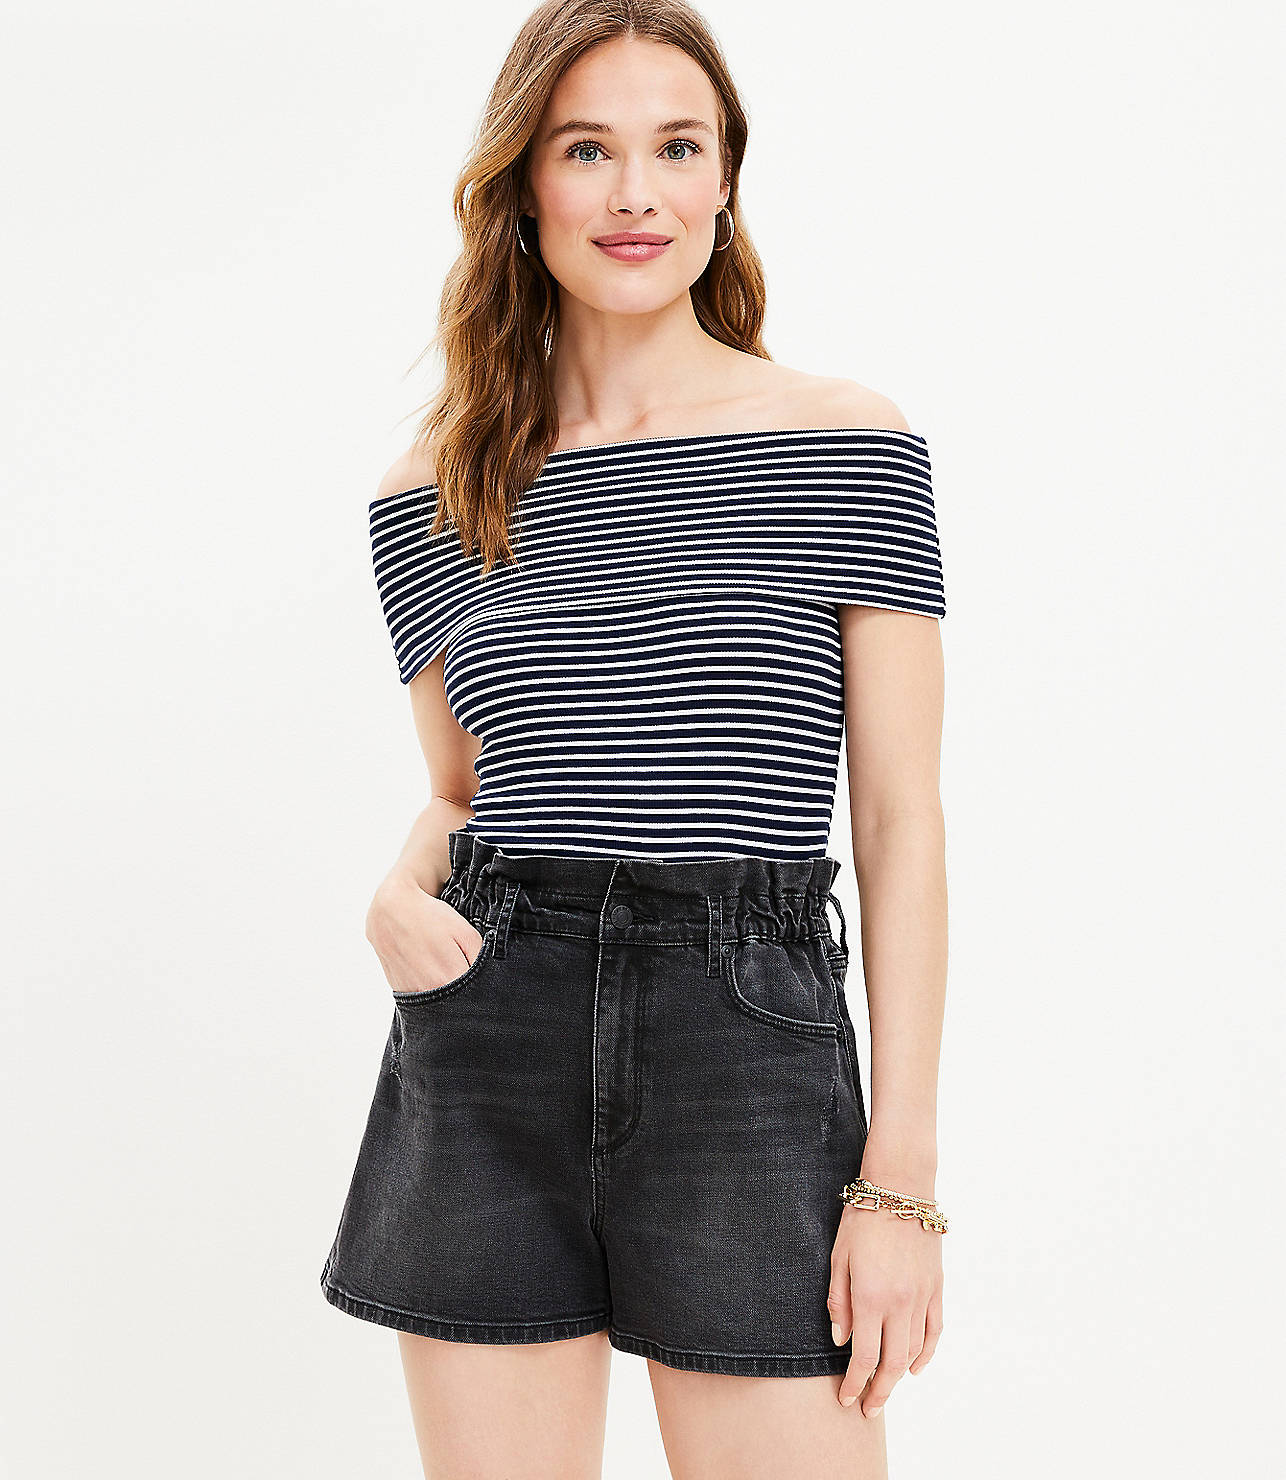 High Rise Paperbag Pull On Denim Shorts in Washed Black Wash